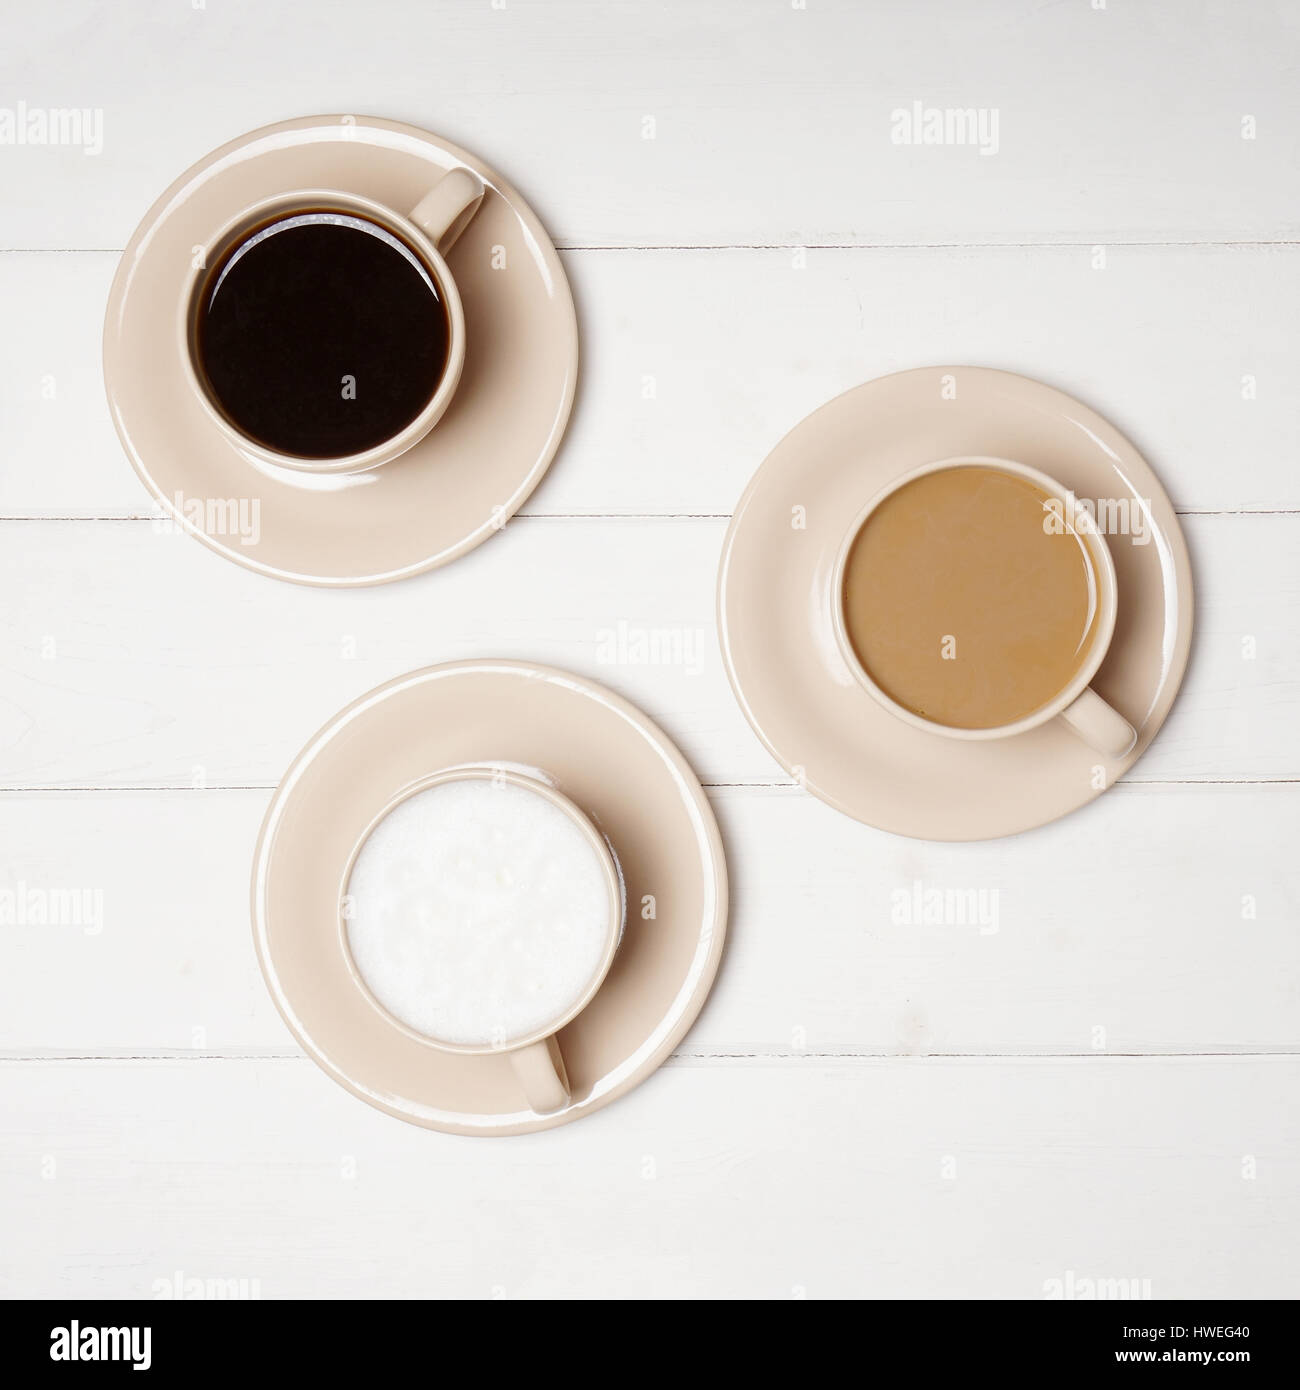 black coffee and flat white and cafe latte Stock Photo